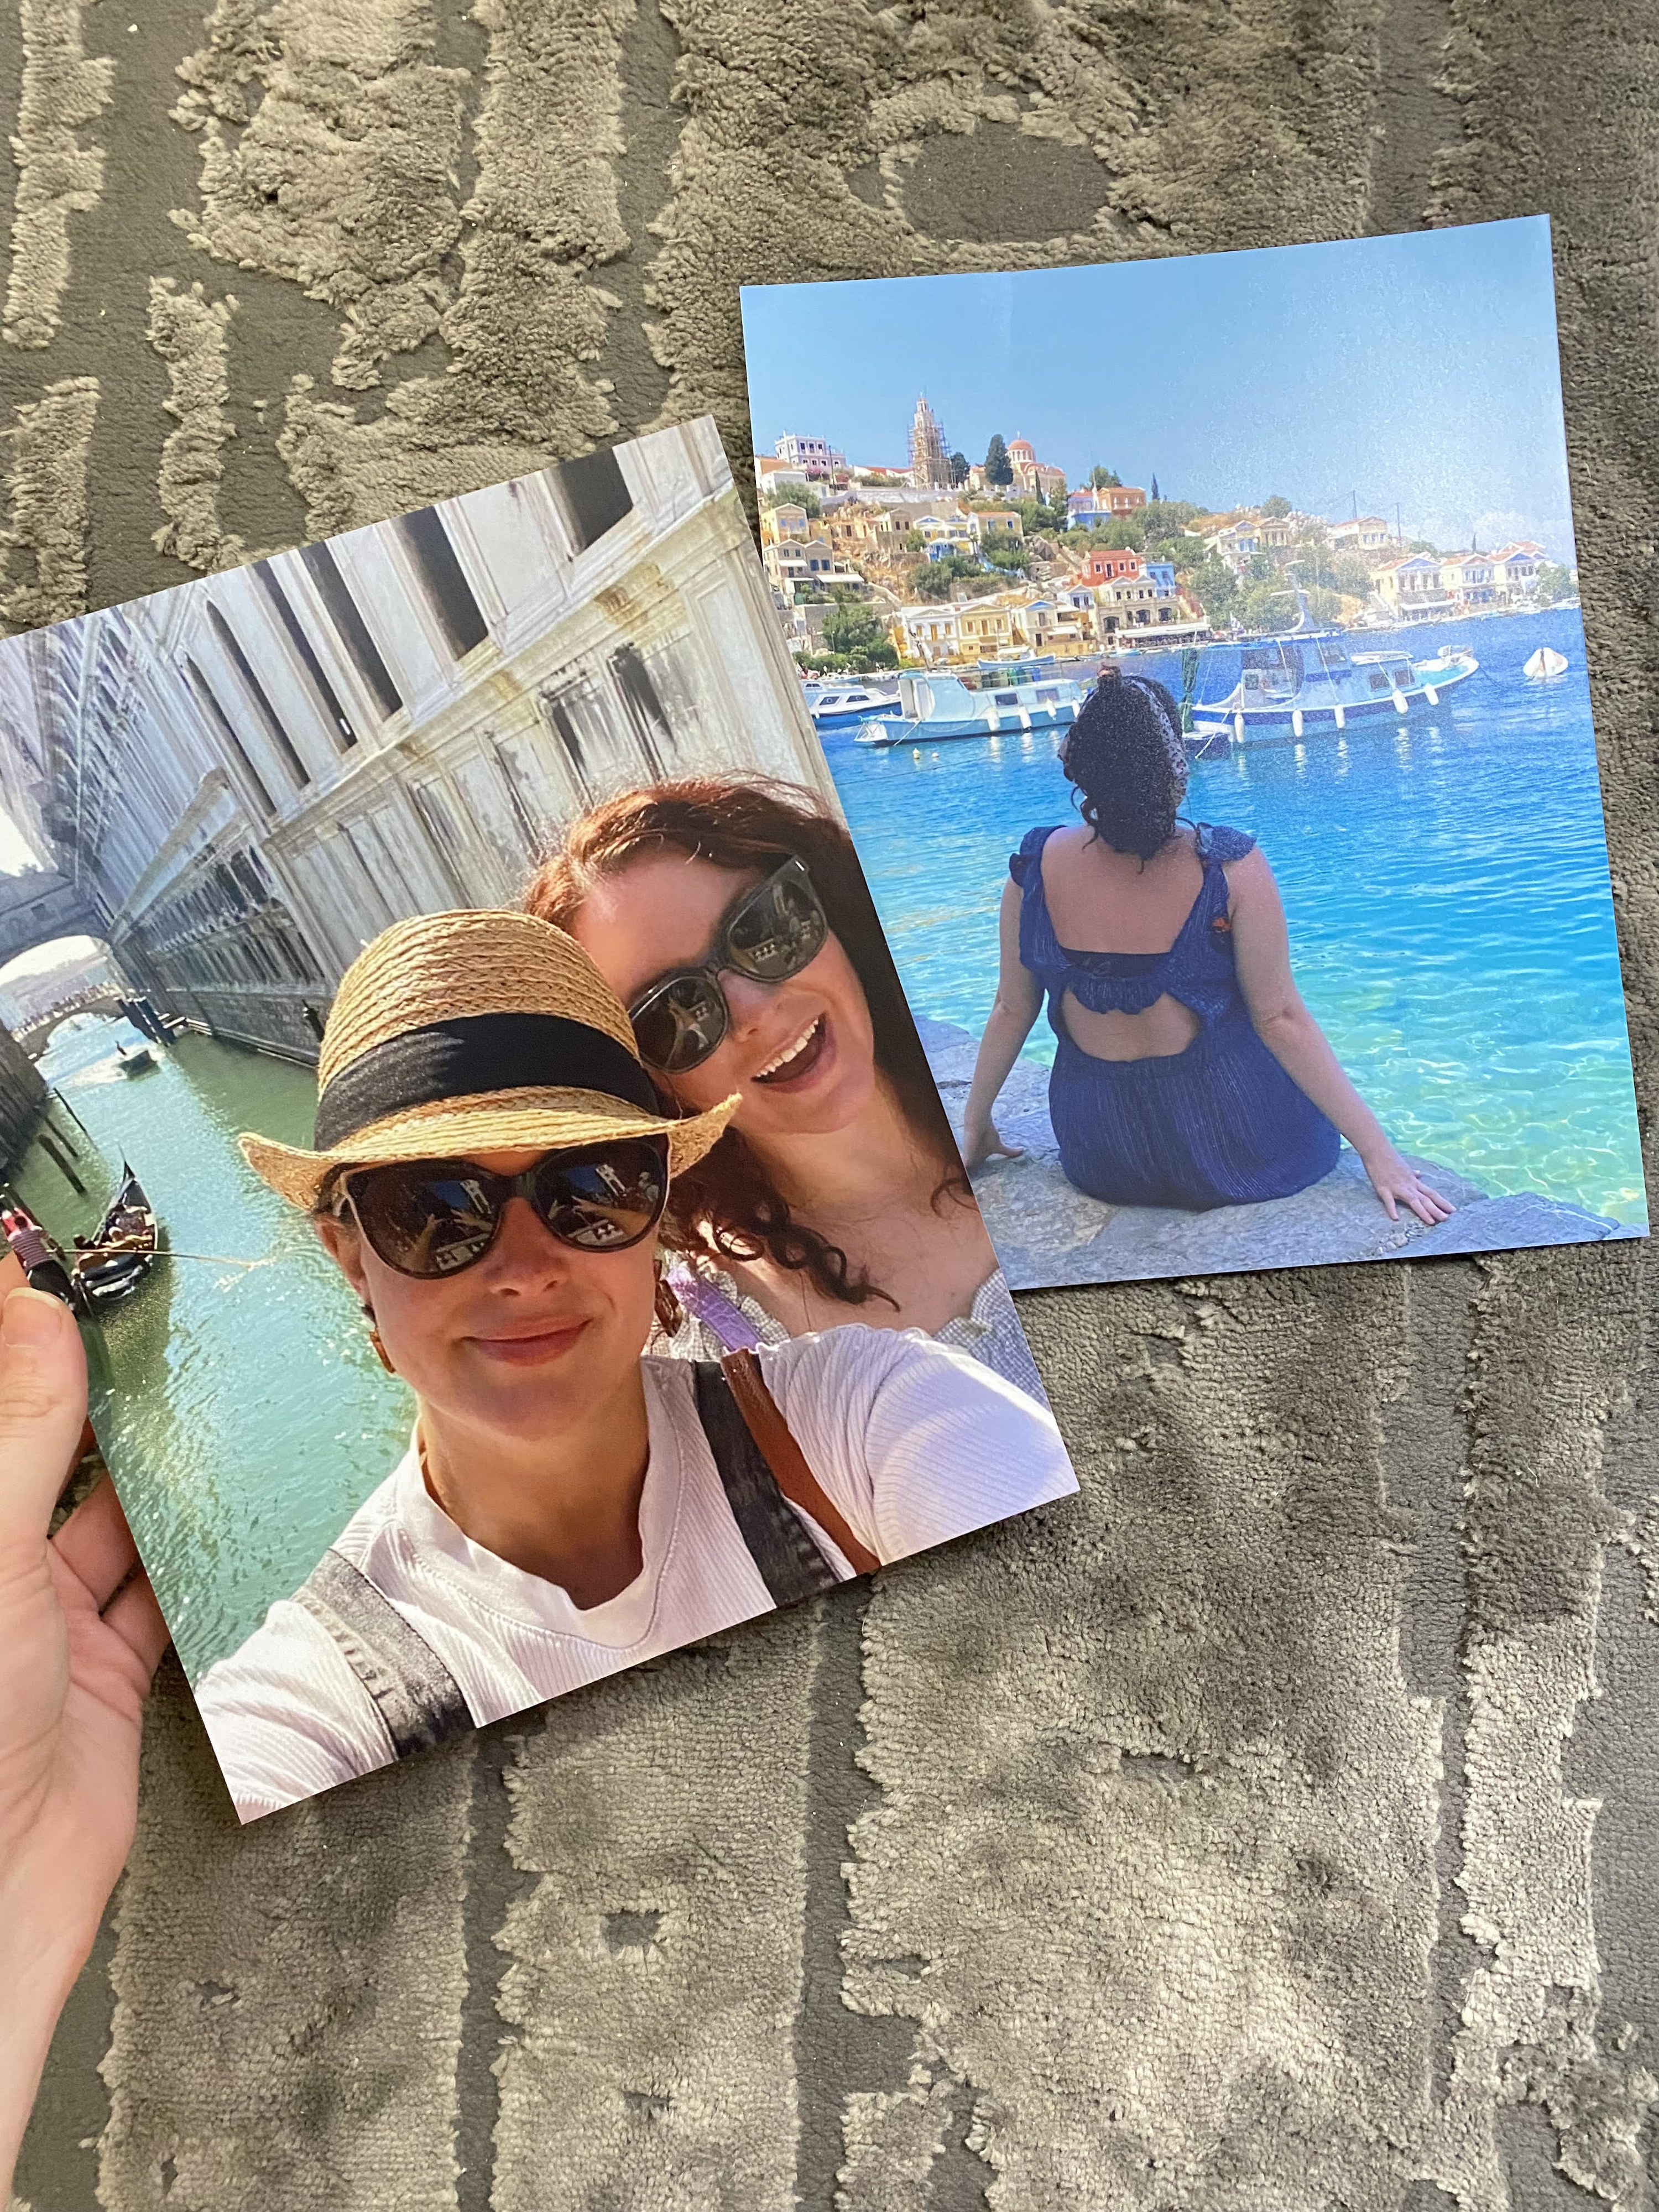 photo prints the writer had printed from travels in Italy and Greece